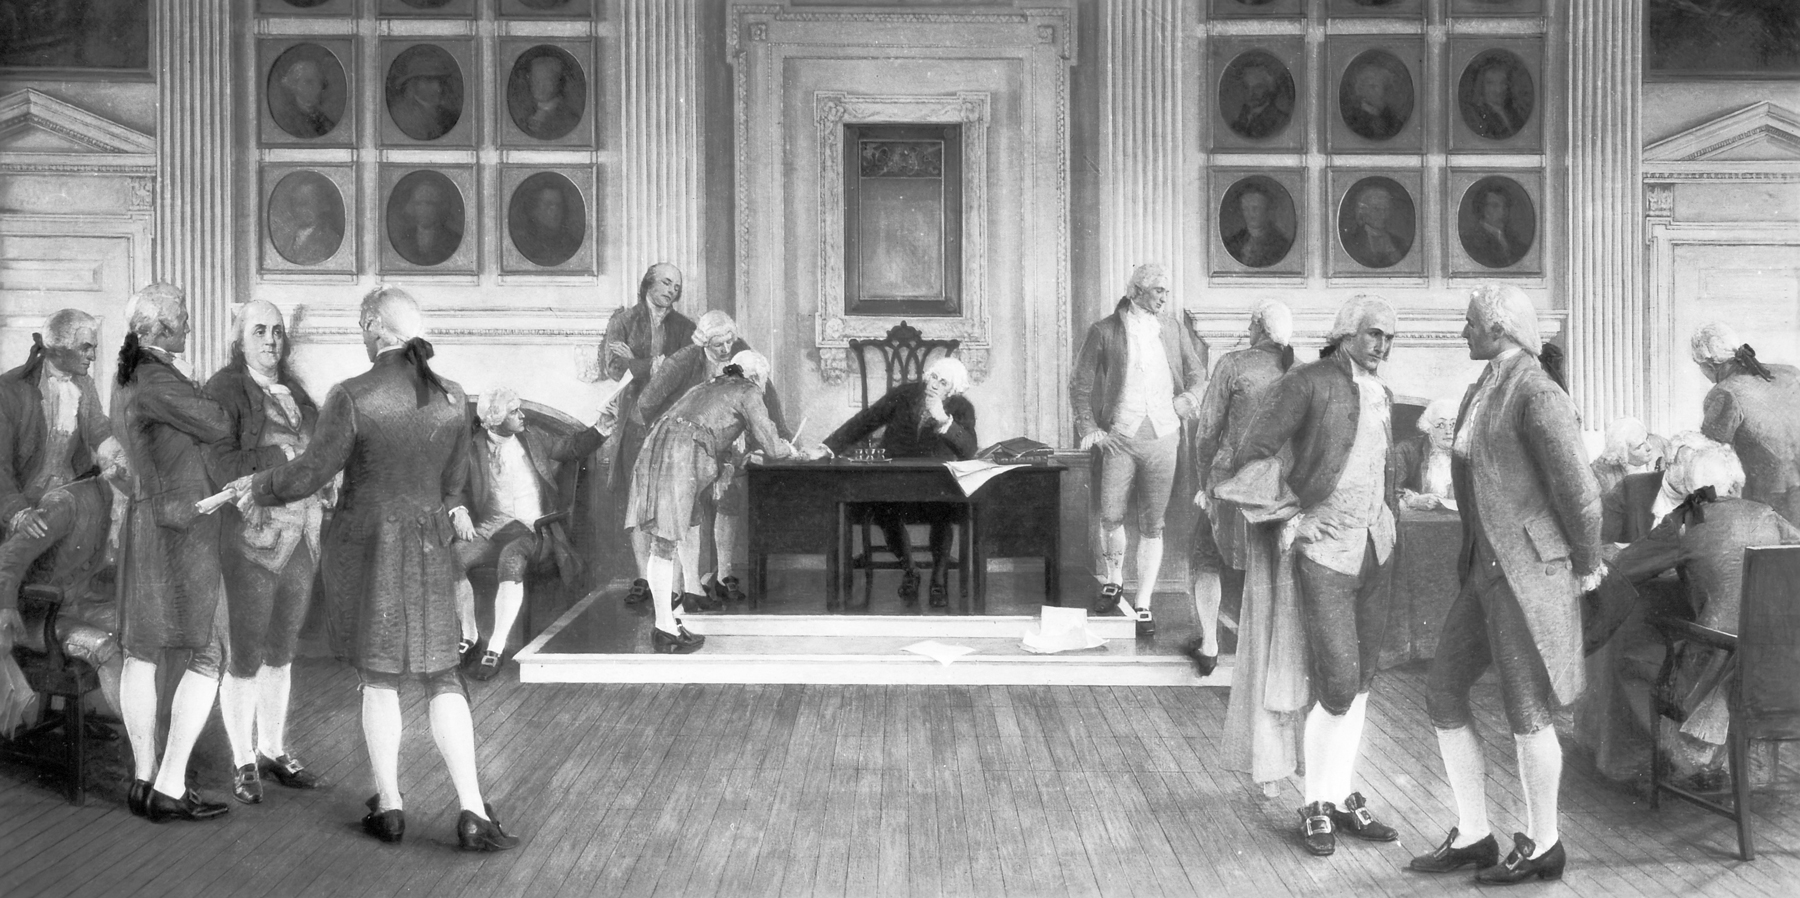 Painting depicting the signing of the American Constitution